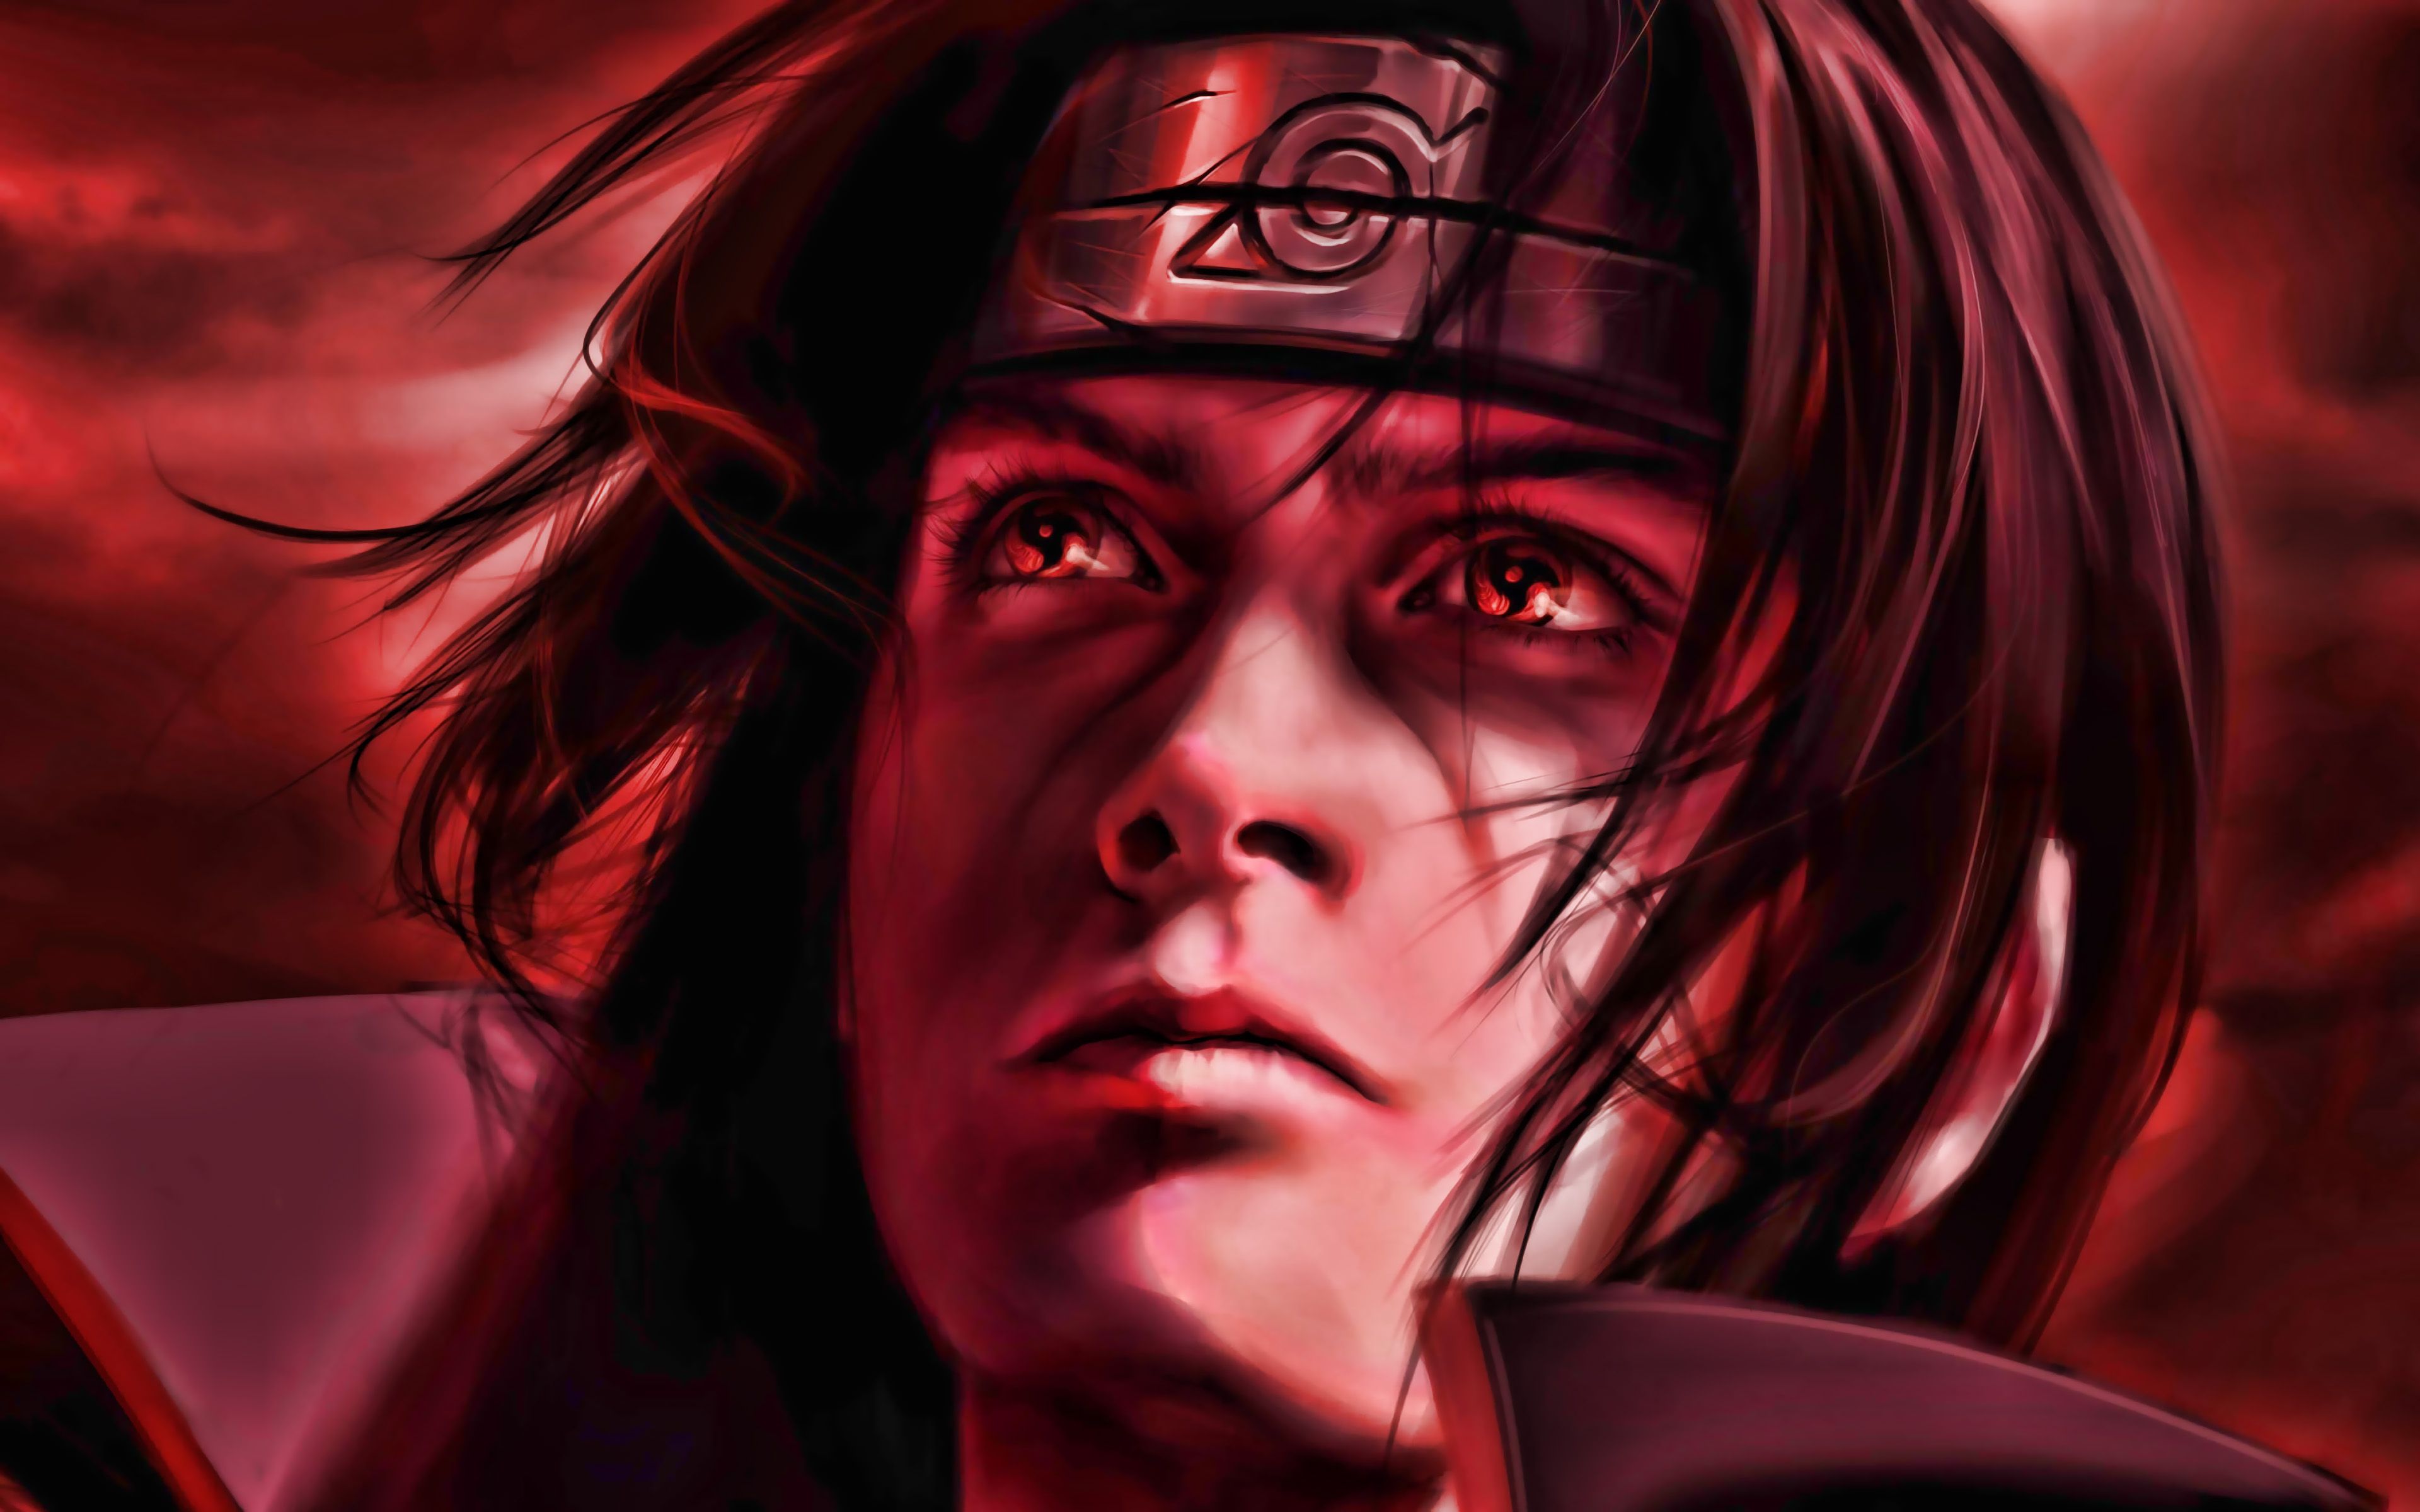 Download wallpapers 4k, Itachi Uchiha, Akatsuki, manga, red eyes, Naruto, Anbu Captain for desktop with resolution 3840x2400. High Quality HD pictures wallpapers